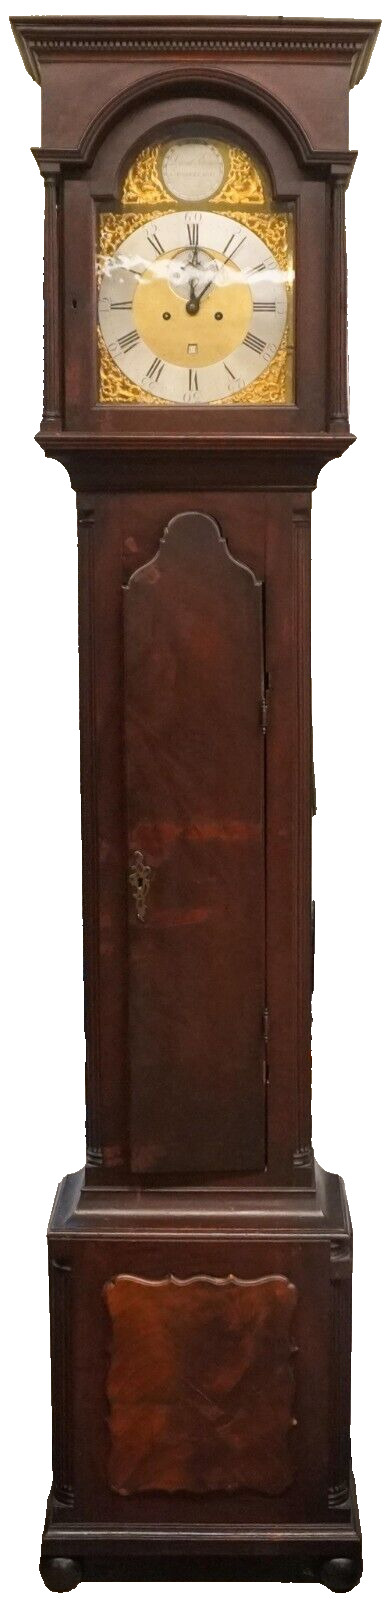 Antique 18th Century Chippendale Tall Case Grandfather Clock by David Paterson